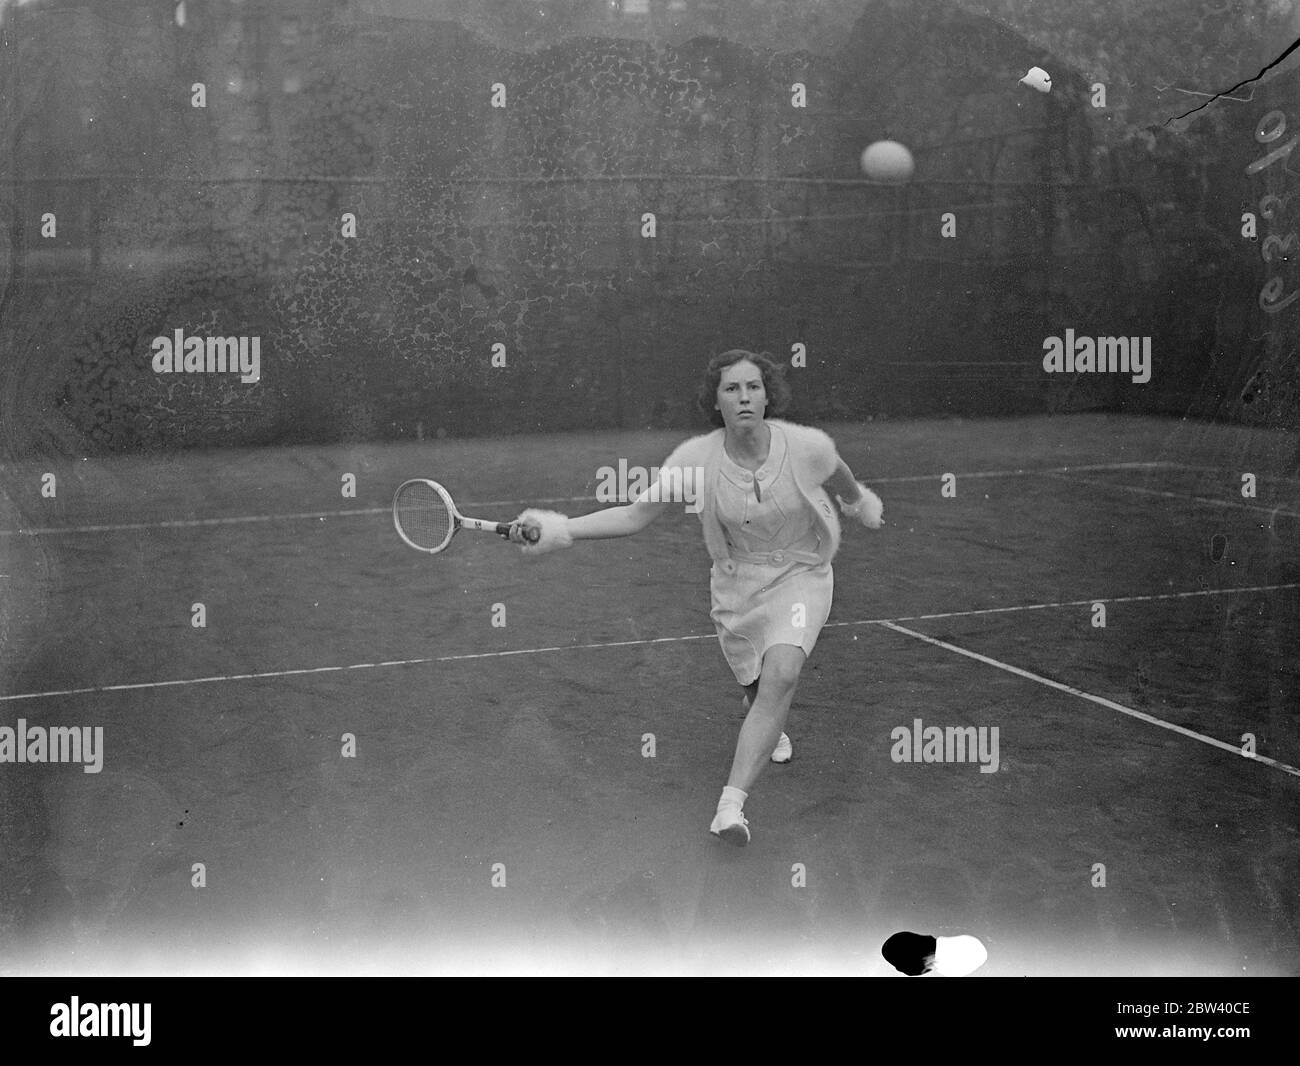 Girl in mittens at Melbury clubs tennis tournament . Leading tennis players , men and women , are turning out for Wimbledon in the Melbury clubs tournament at Kensington . This tournament is the first tryout of real lawn tennis strength this season . Photo shows , Miss H Dundas wearing white fleecy mittens in her match against Miss J Harvest . 12 April 1937 Stock Photo